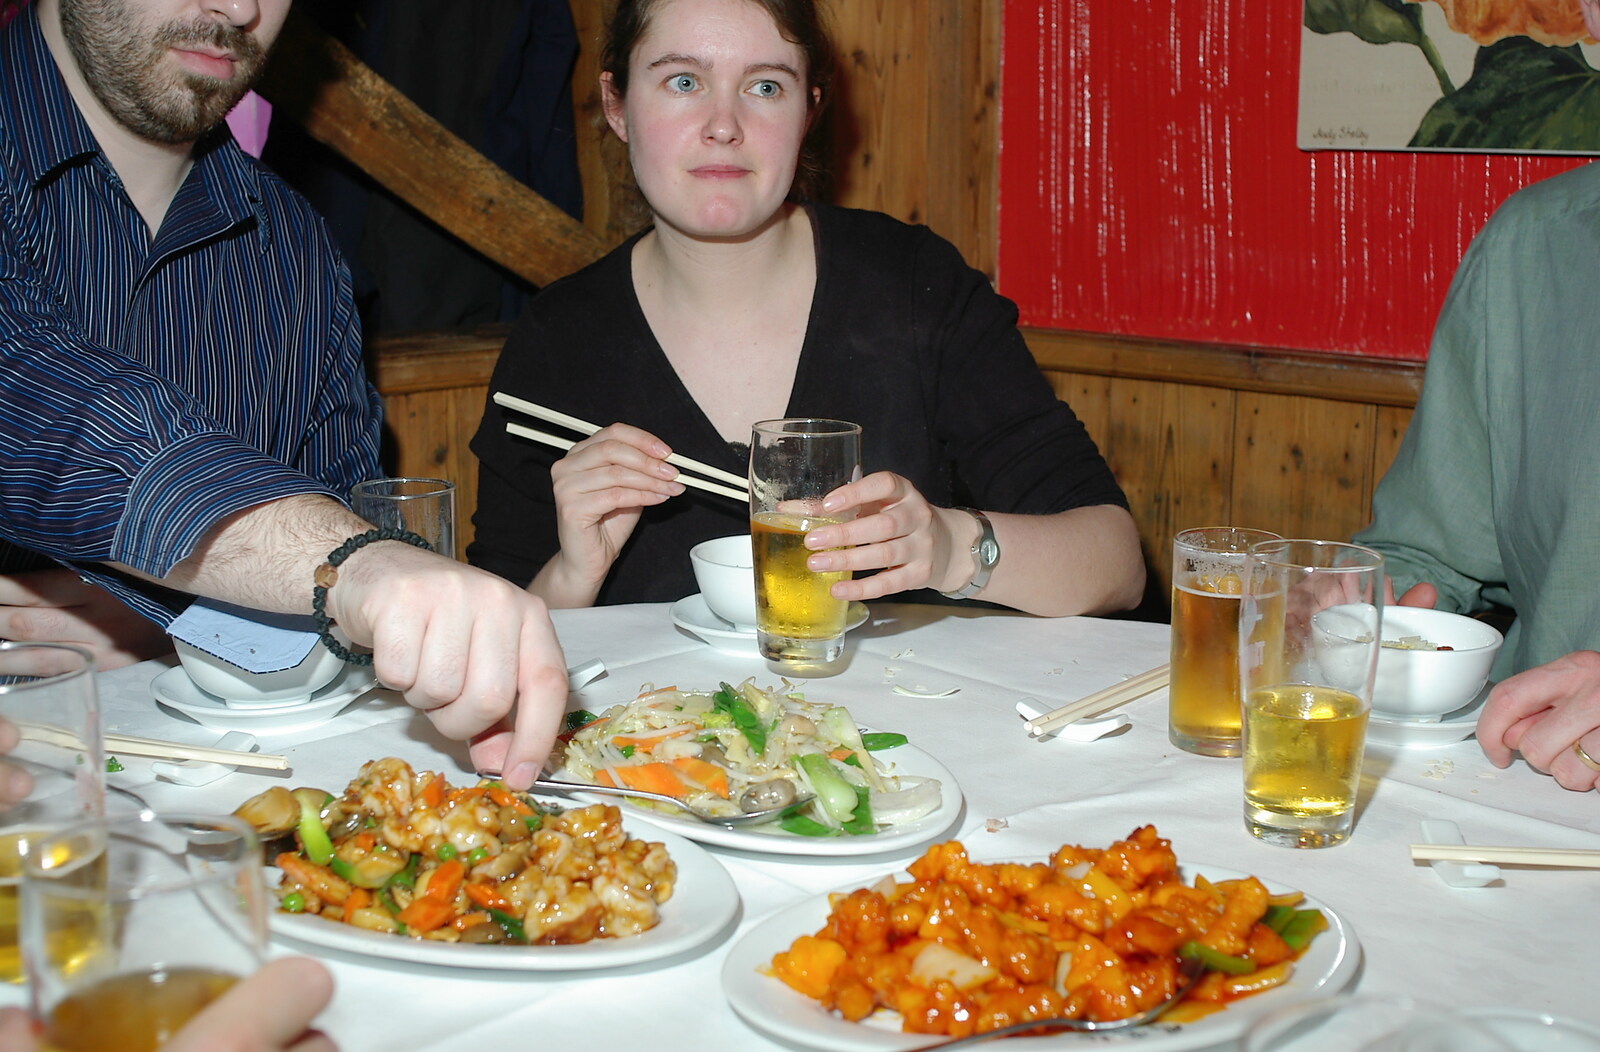 A Walk Around Lymington, and Luke Leaves Qualcomm Cambridge - 13th March 2005: Isobel, armed with chopsticks